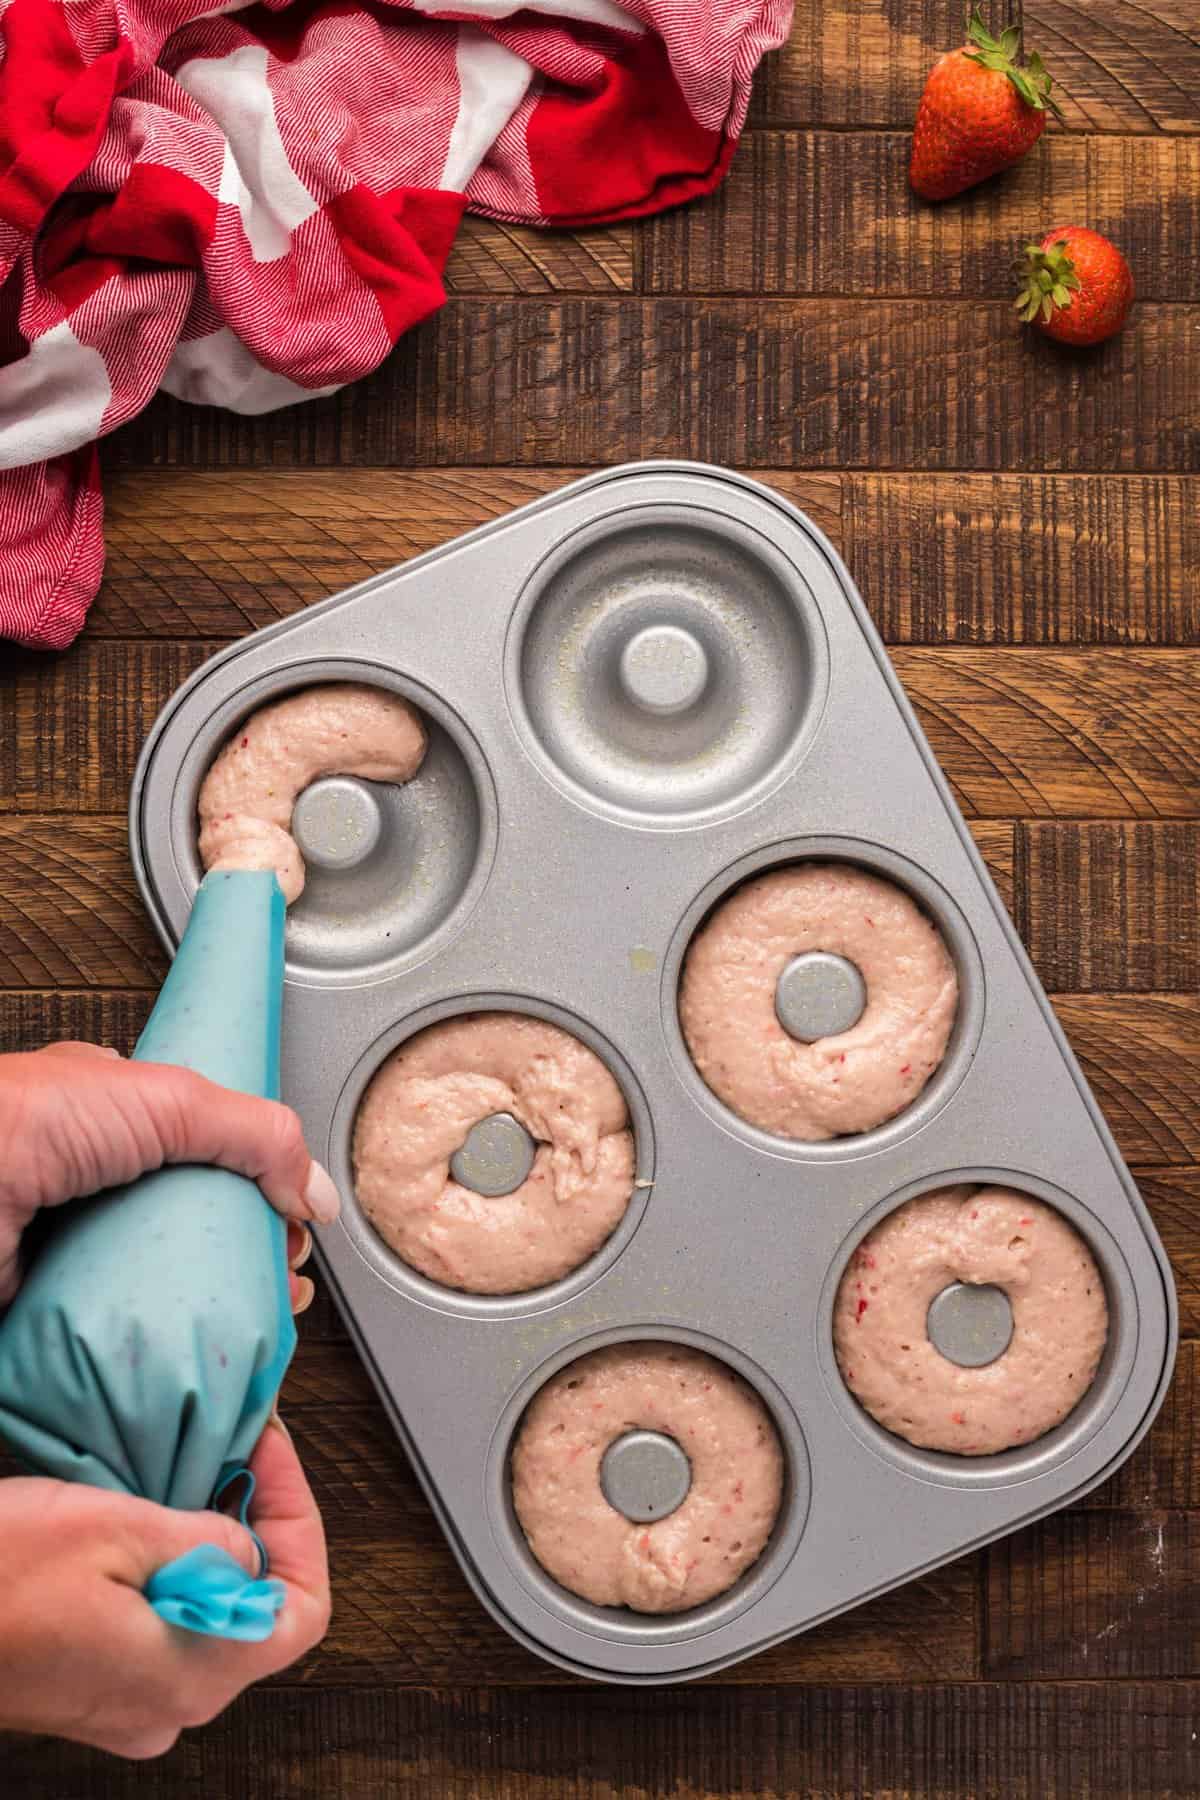 Hand piping the donut batter into the donut pans.